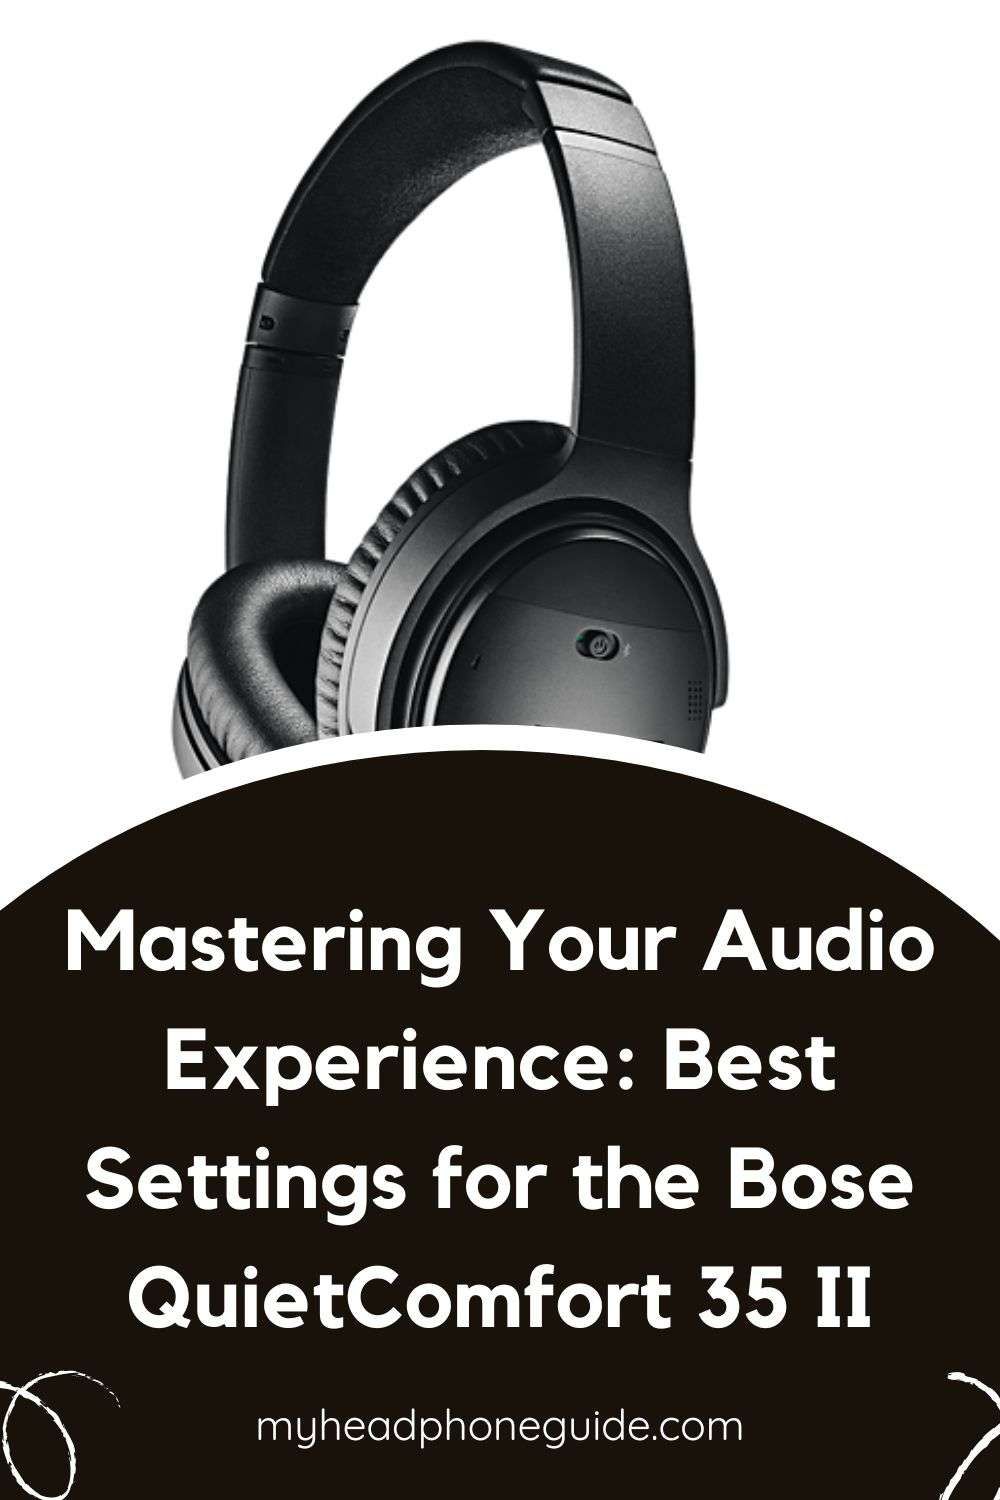 Best Settings for the Bose QuietComfort 35 II